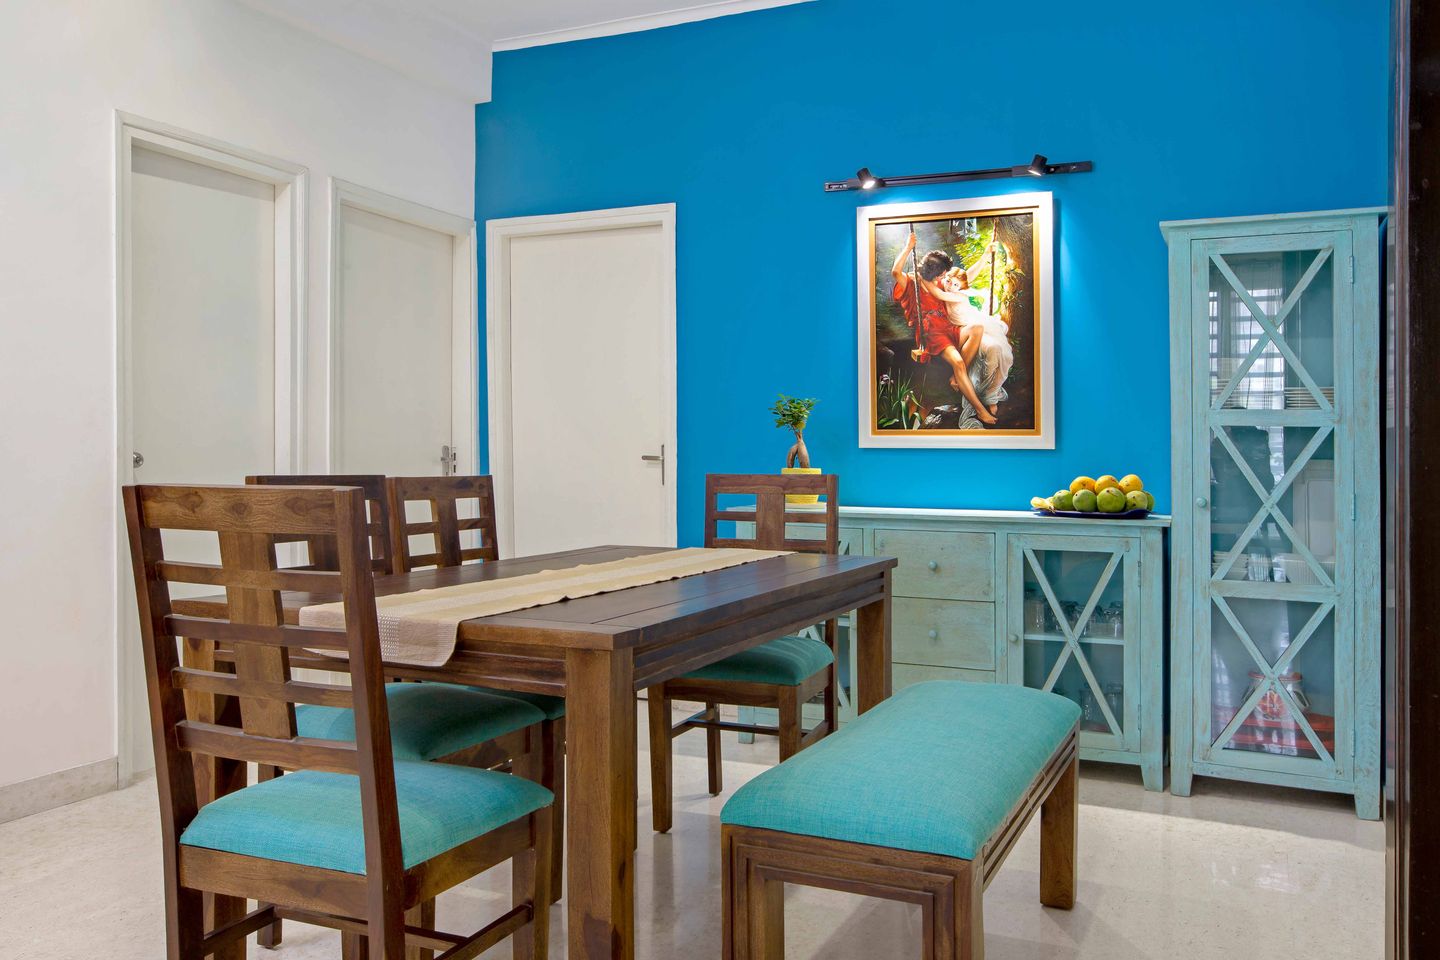 Wooden And Blue 4-Seater Dining Room Design With Blue Seater - Livspace